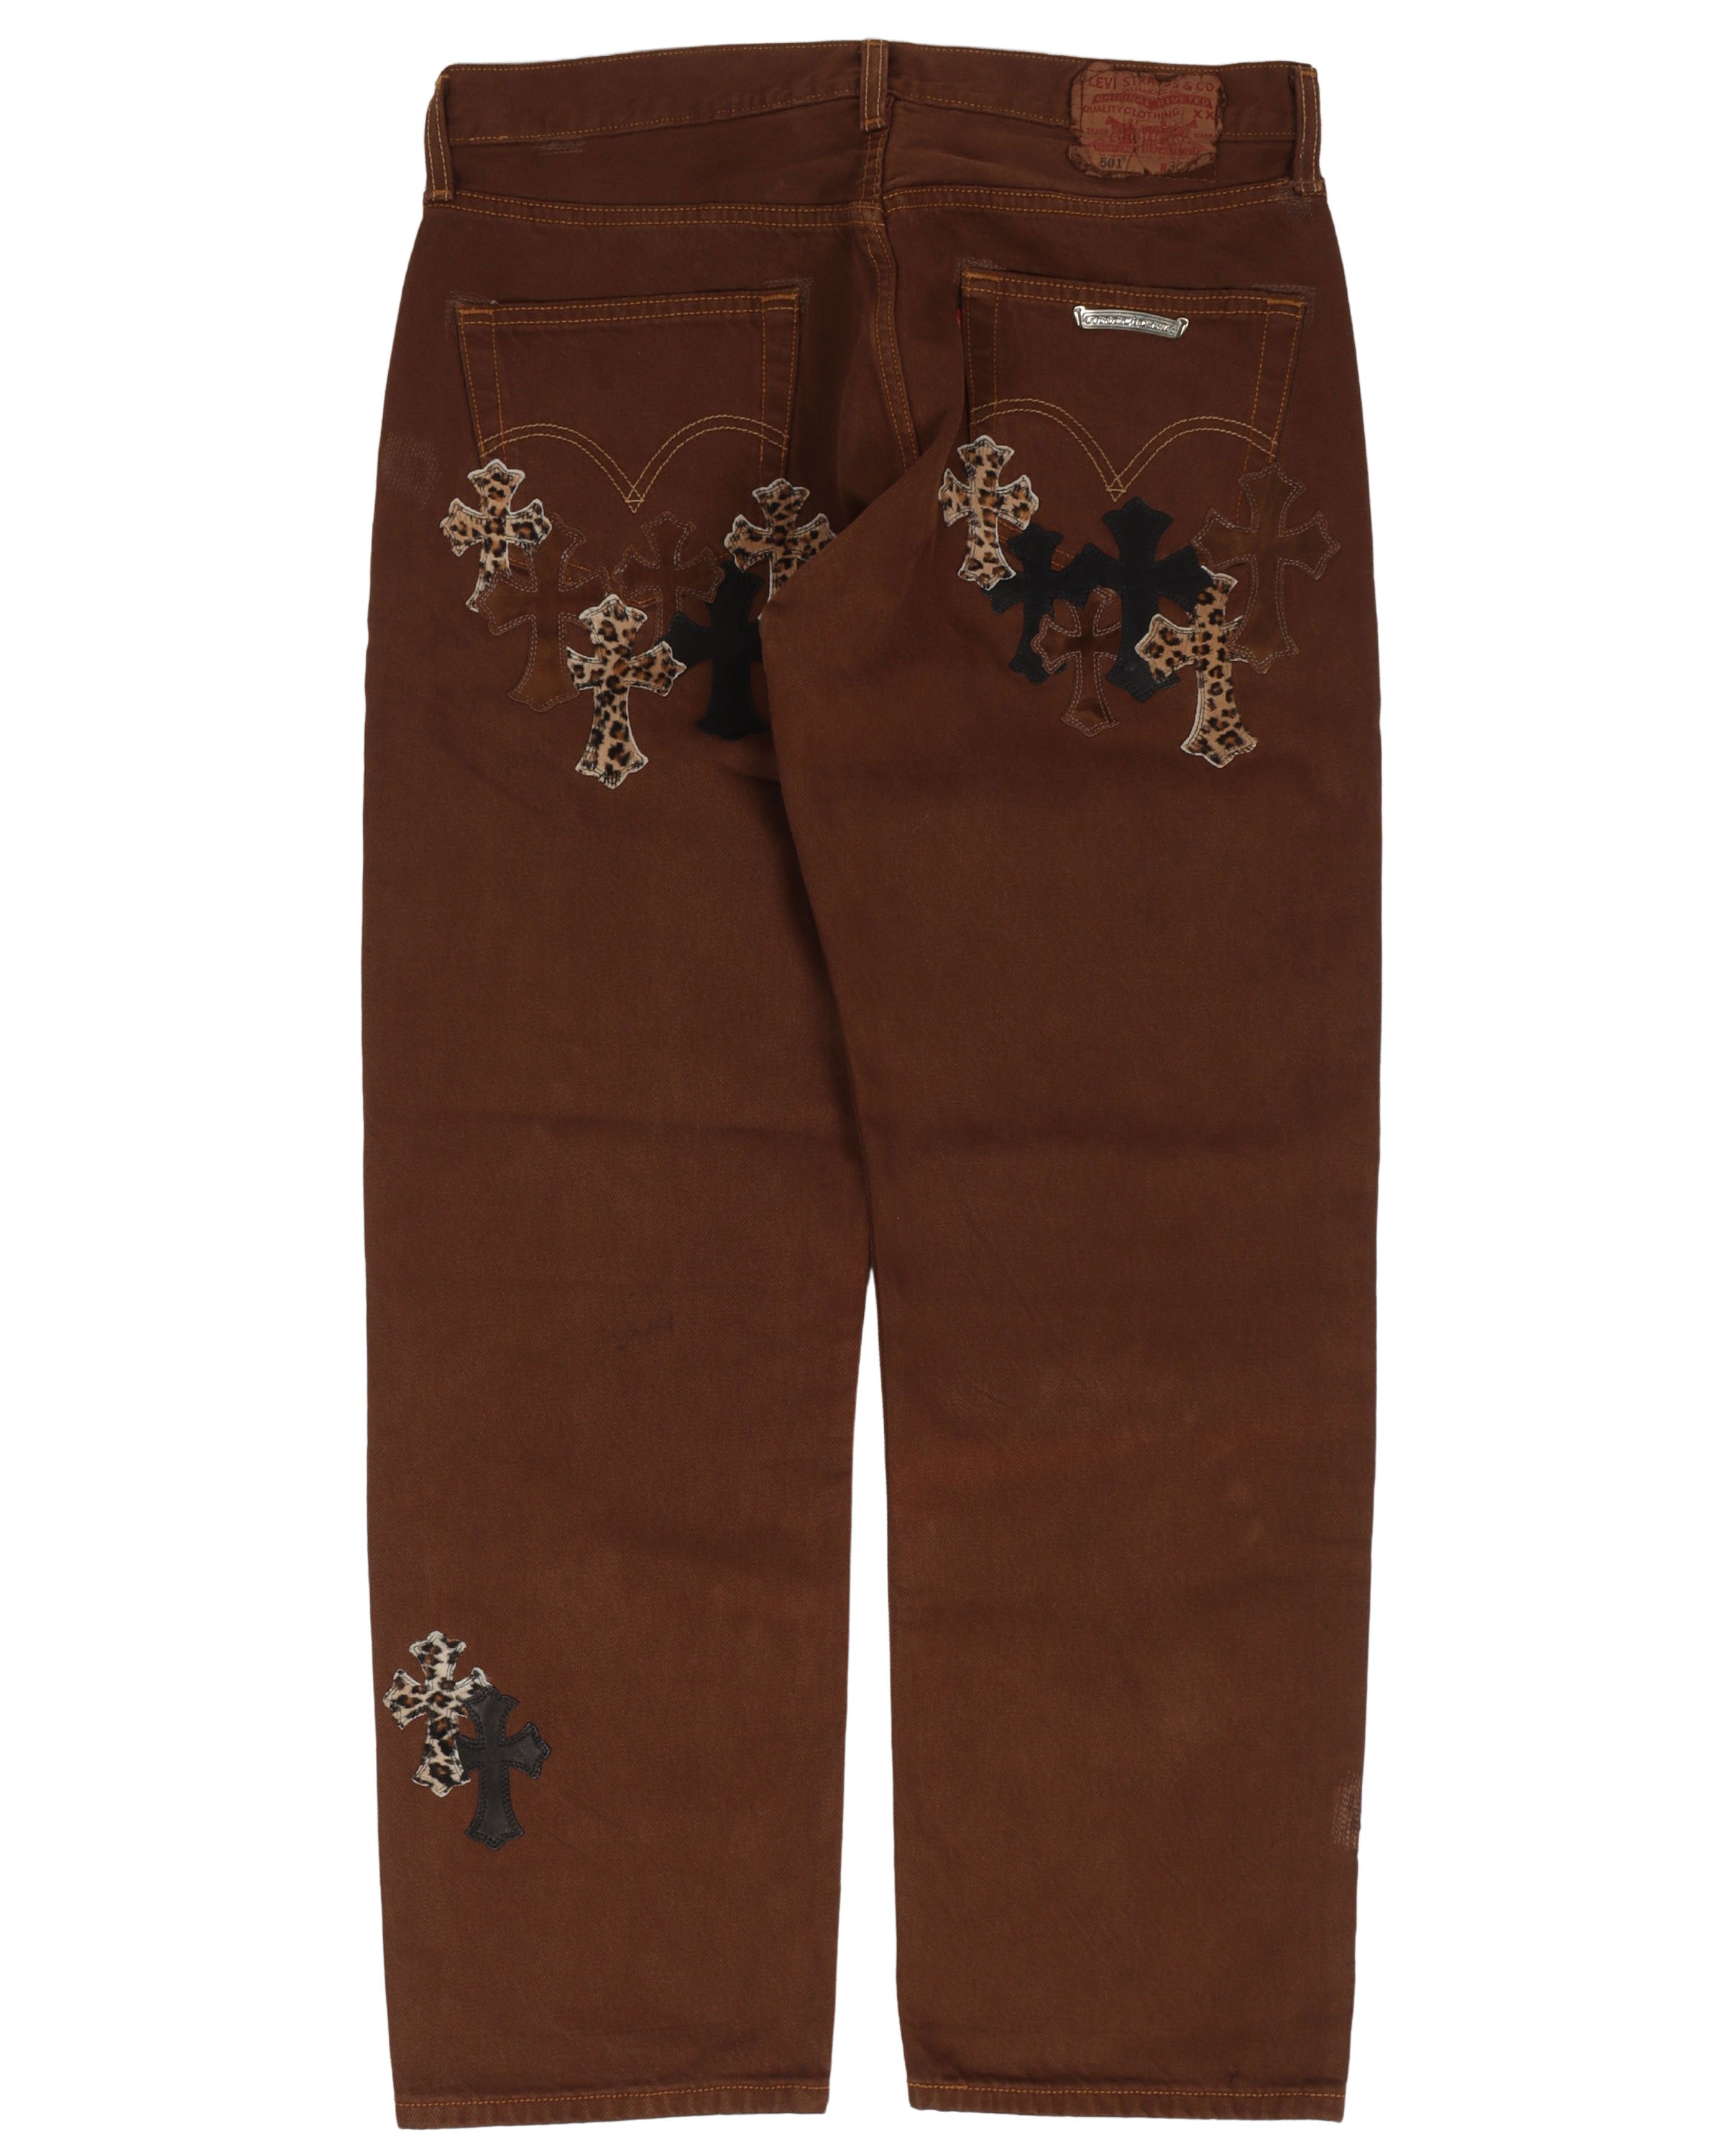 NYFW Exclusive Cheetah Cross Patch Jeans